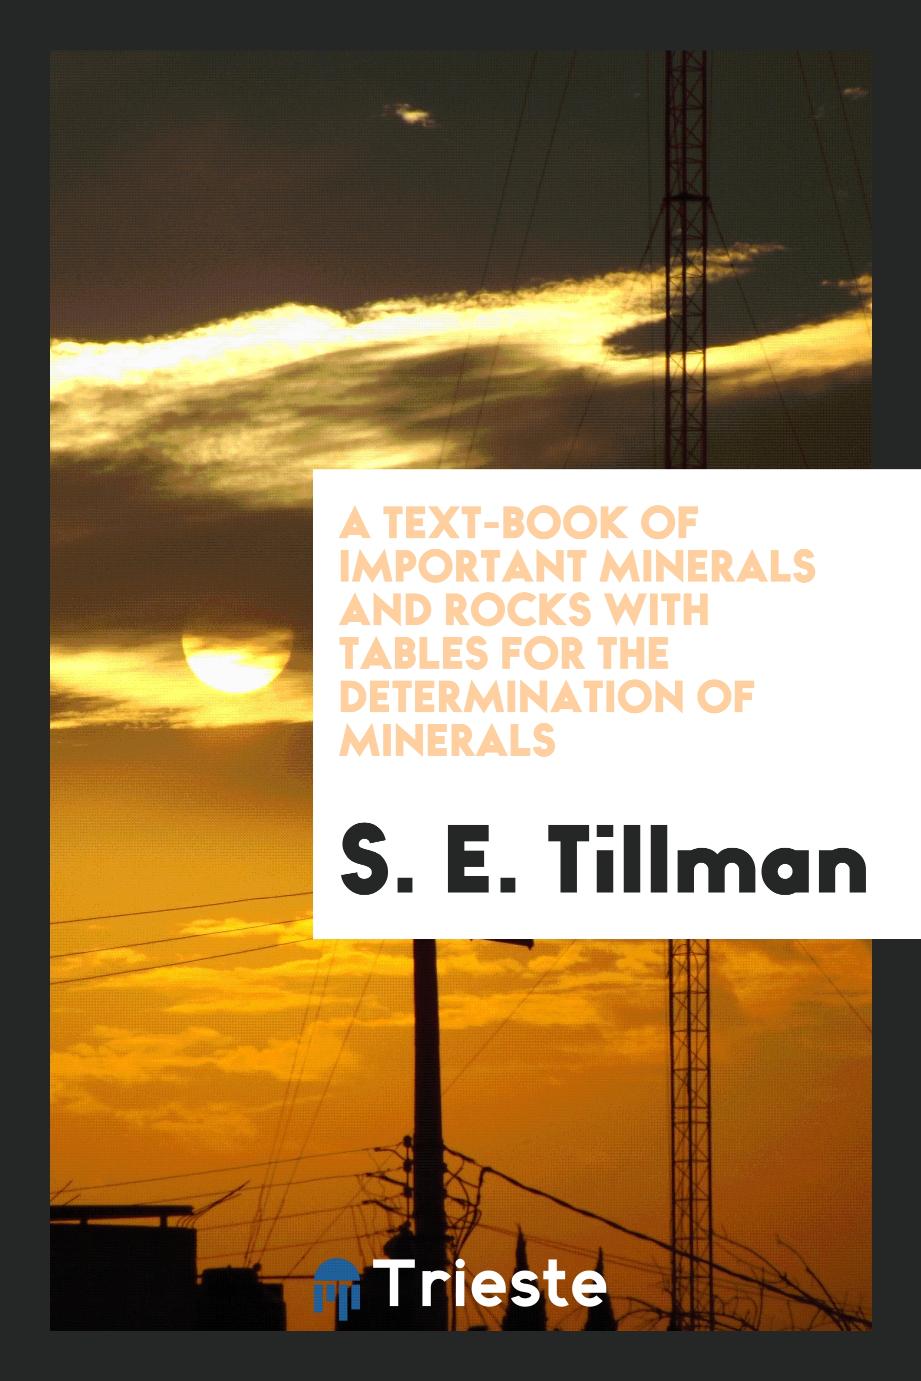 A text-book of important minerals and rocks with tables for the determination of minerals